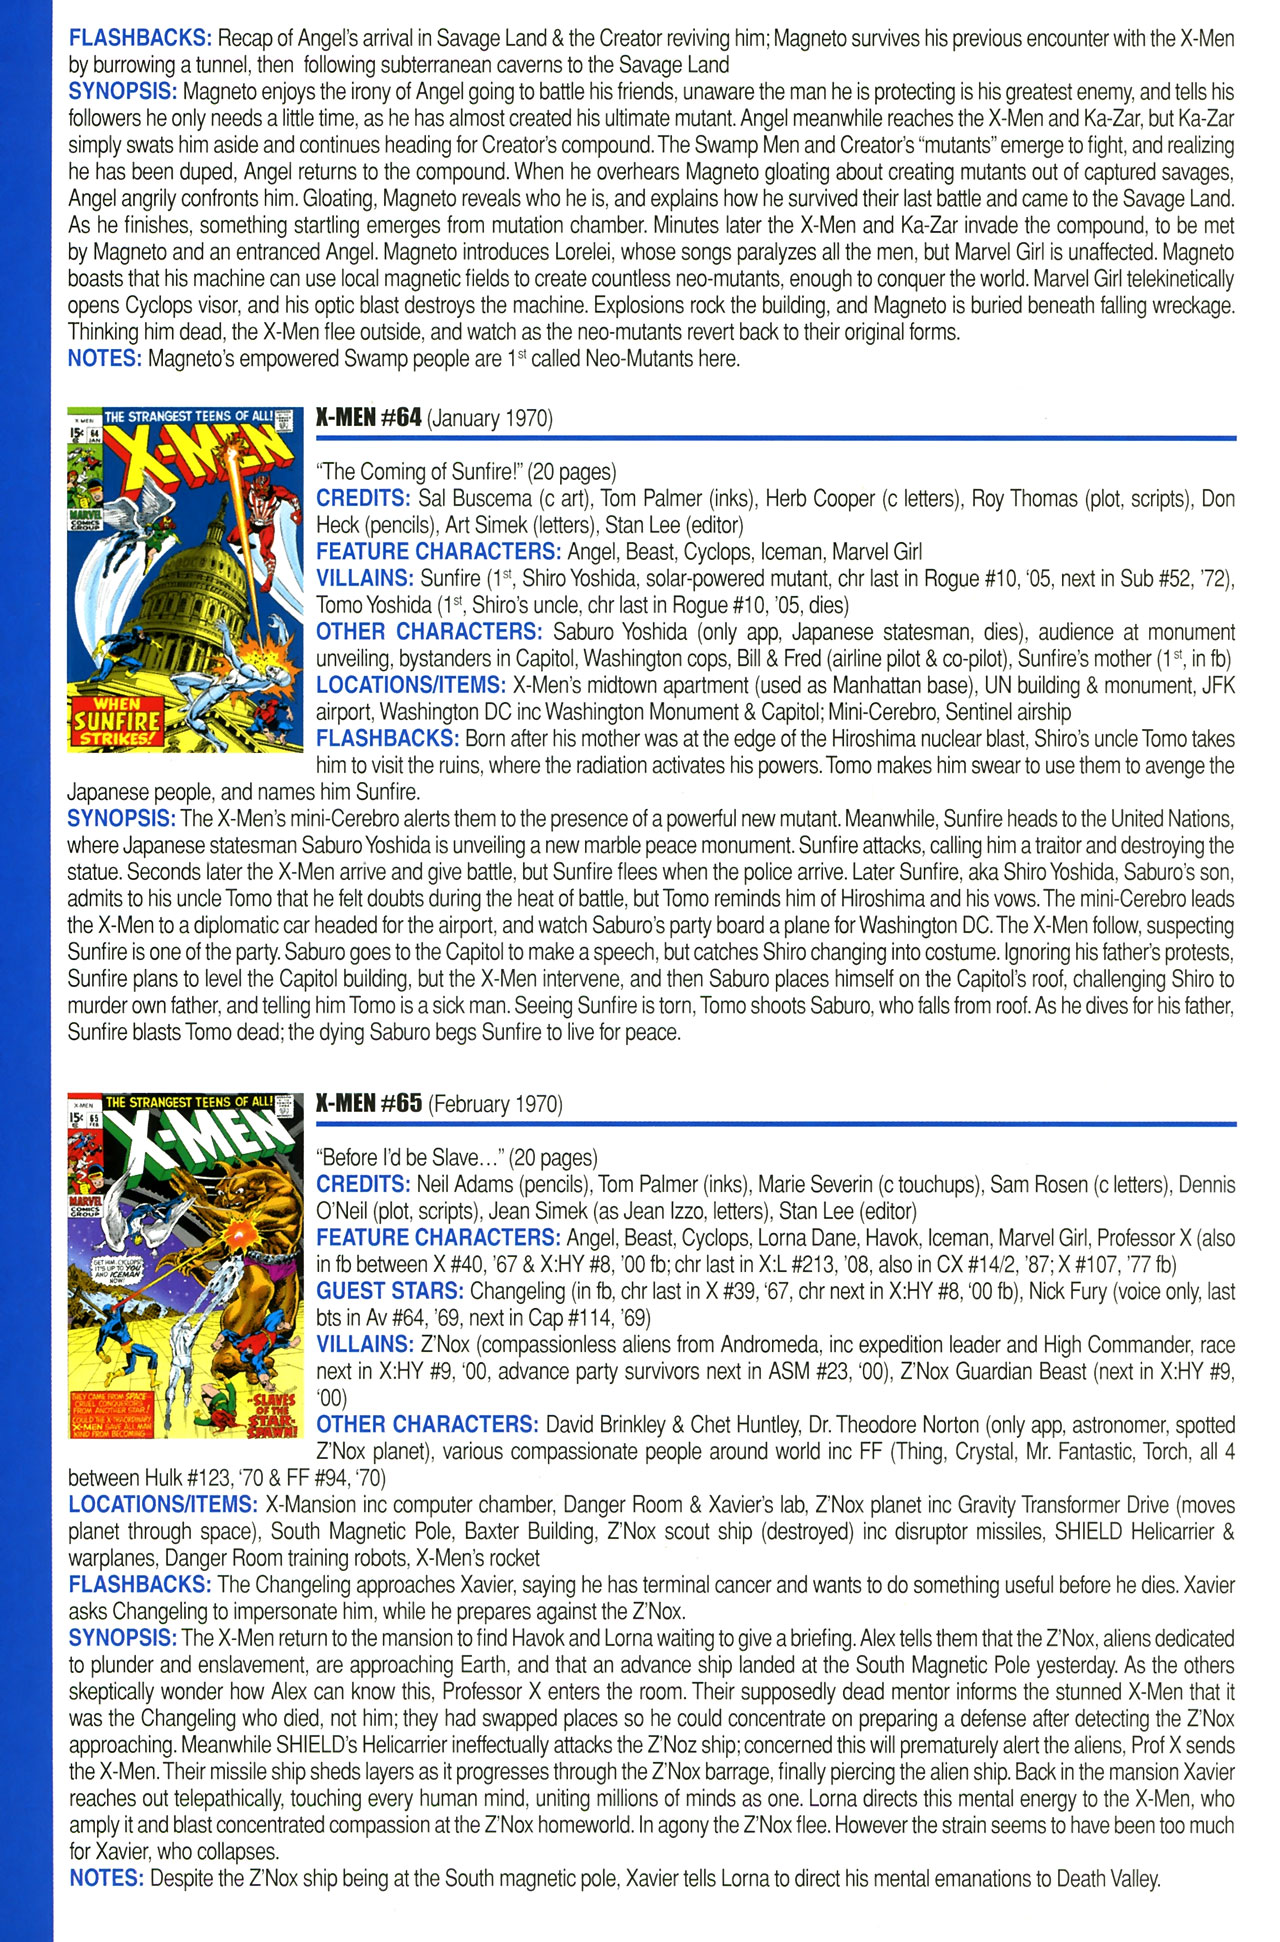 Read online Official Index to the Marvel Universe comic -  Issue #2 - 52